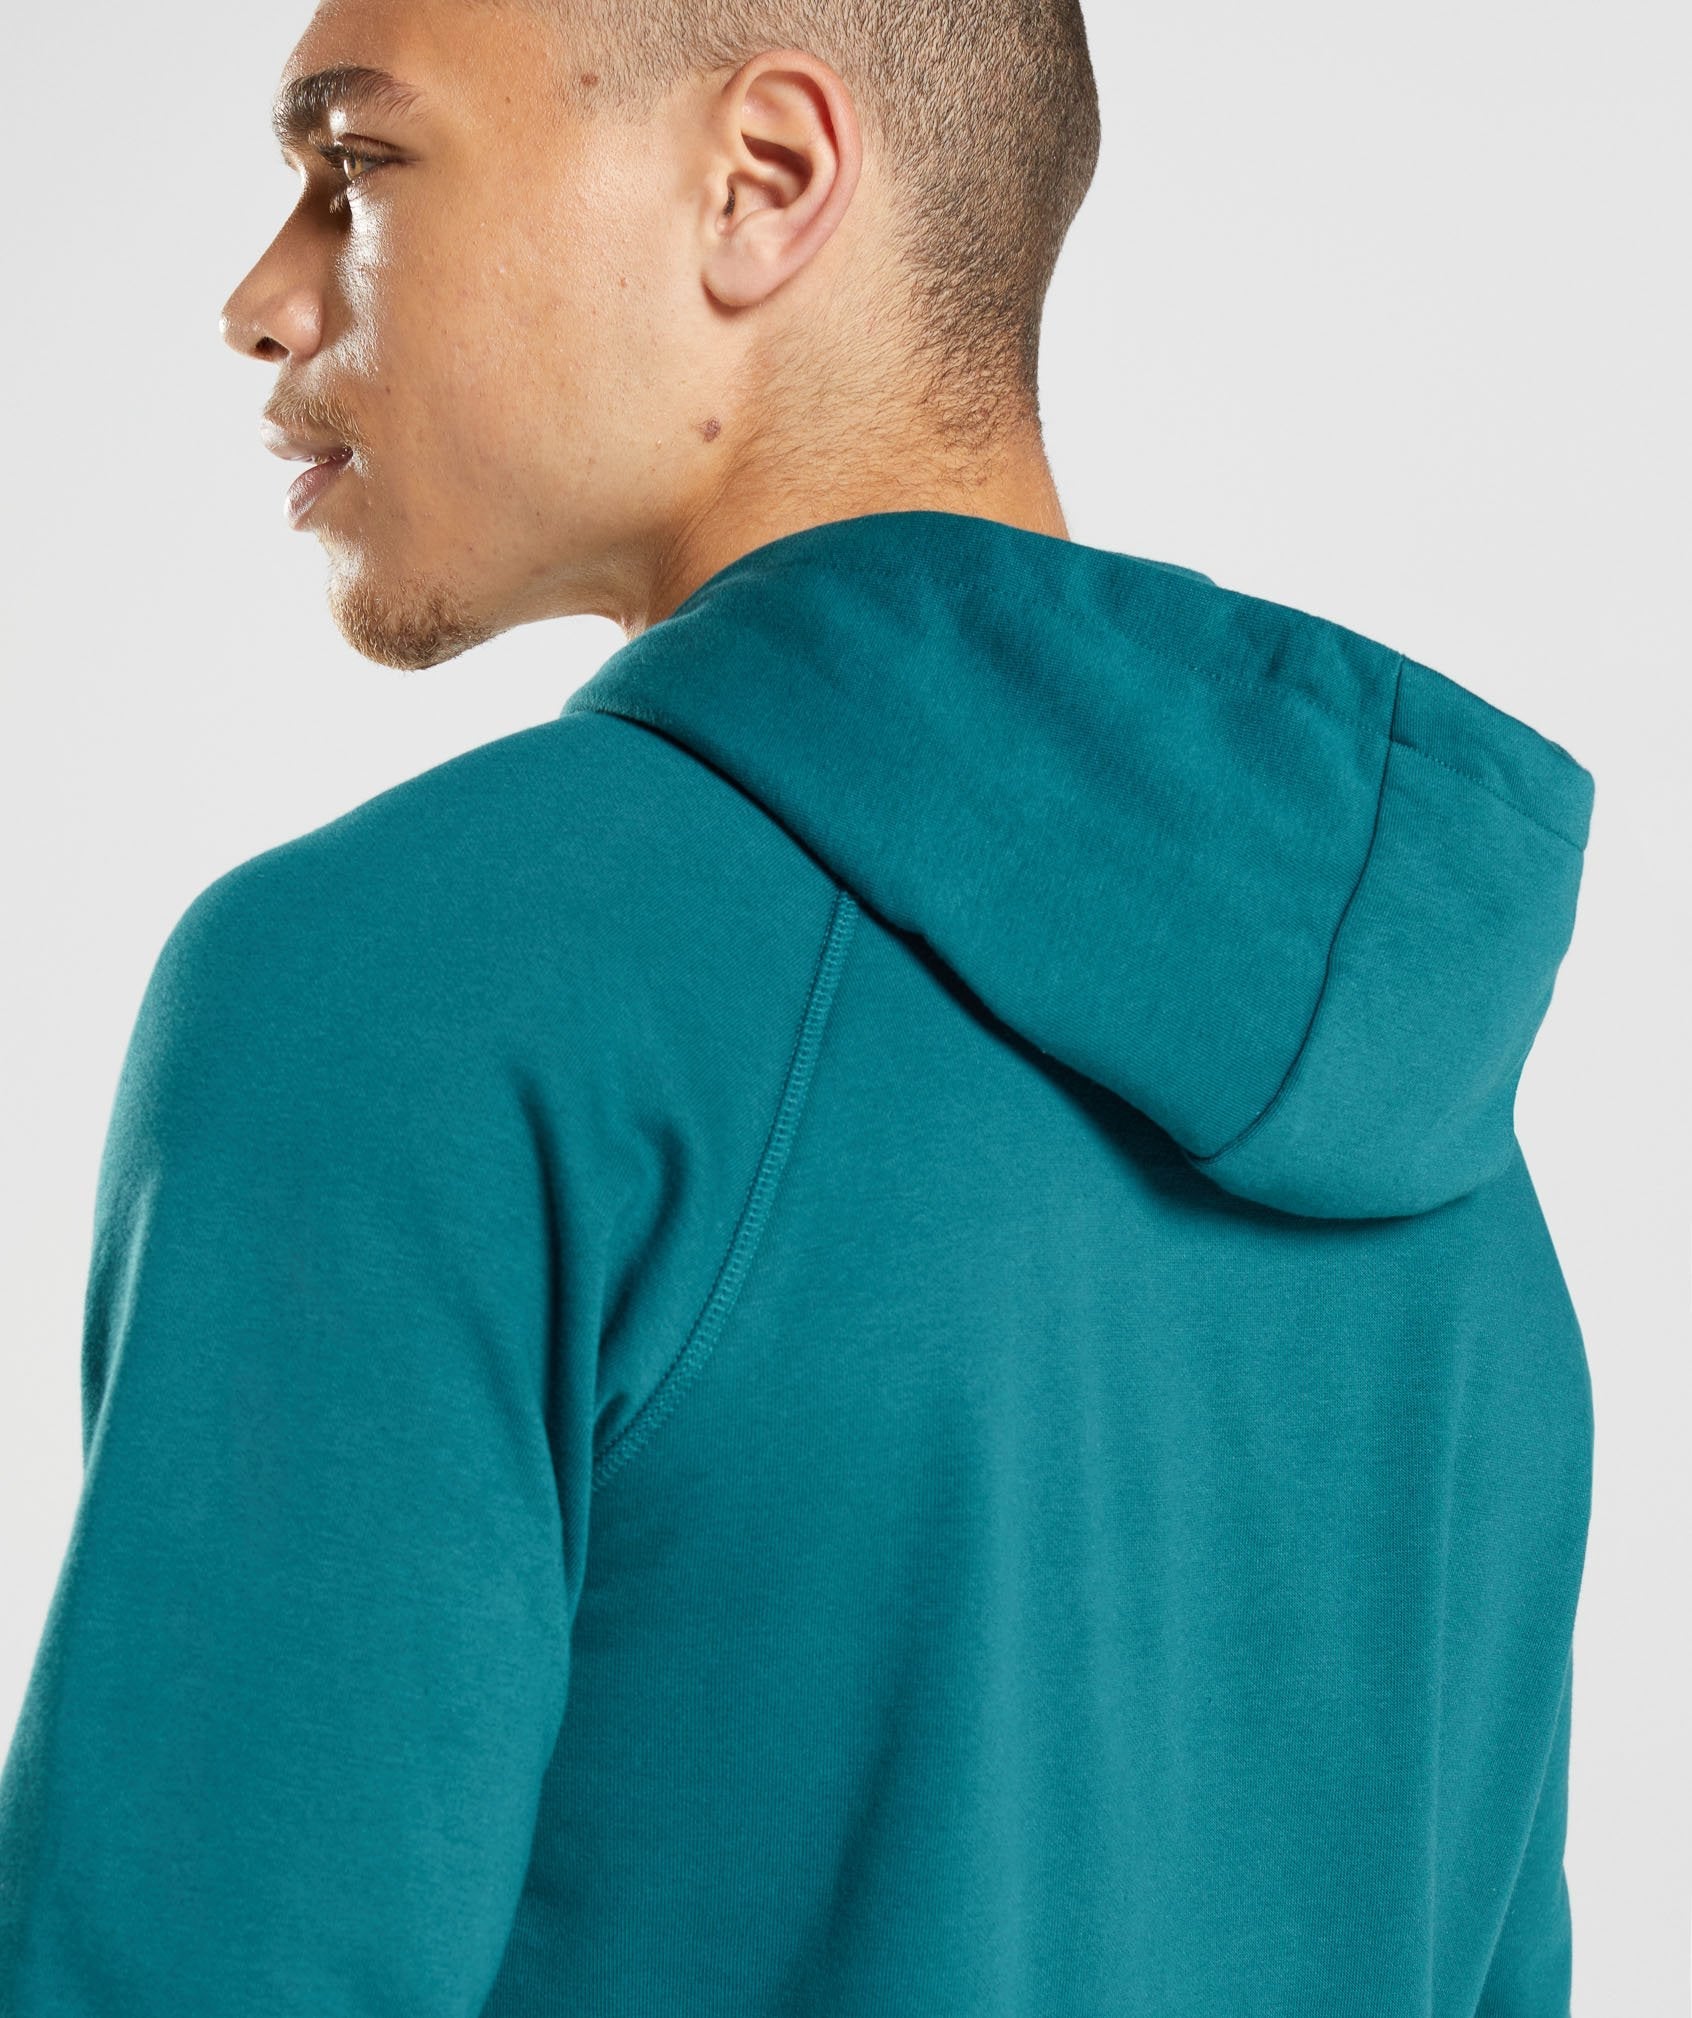 Sharkhead Infill Hoodie in Teal - view 6